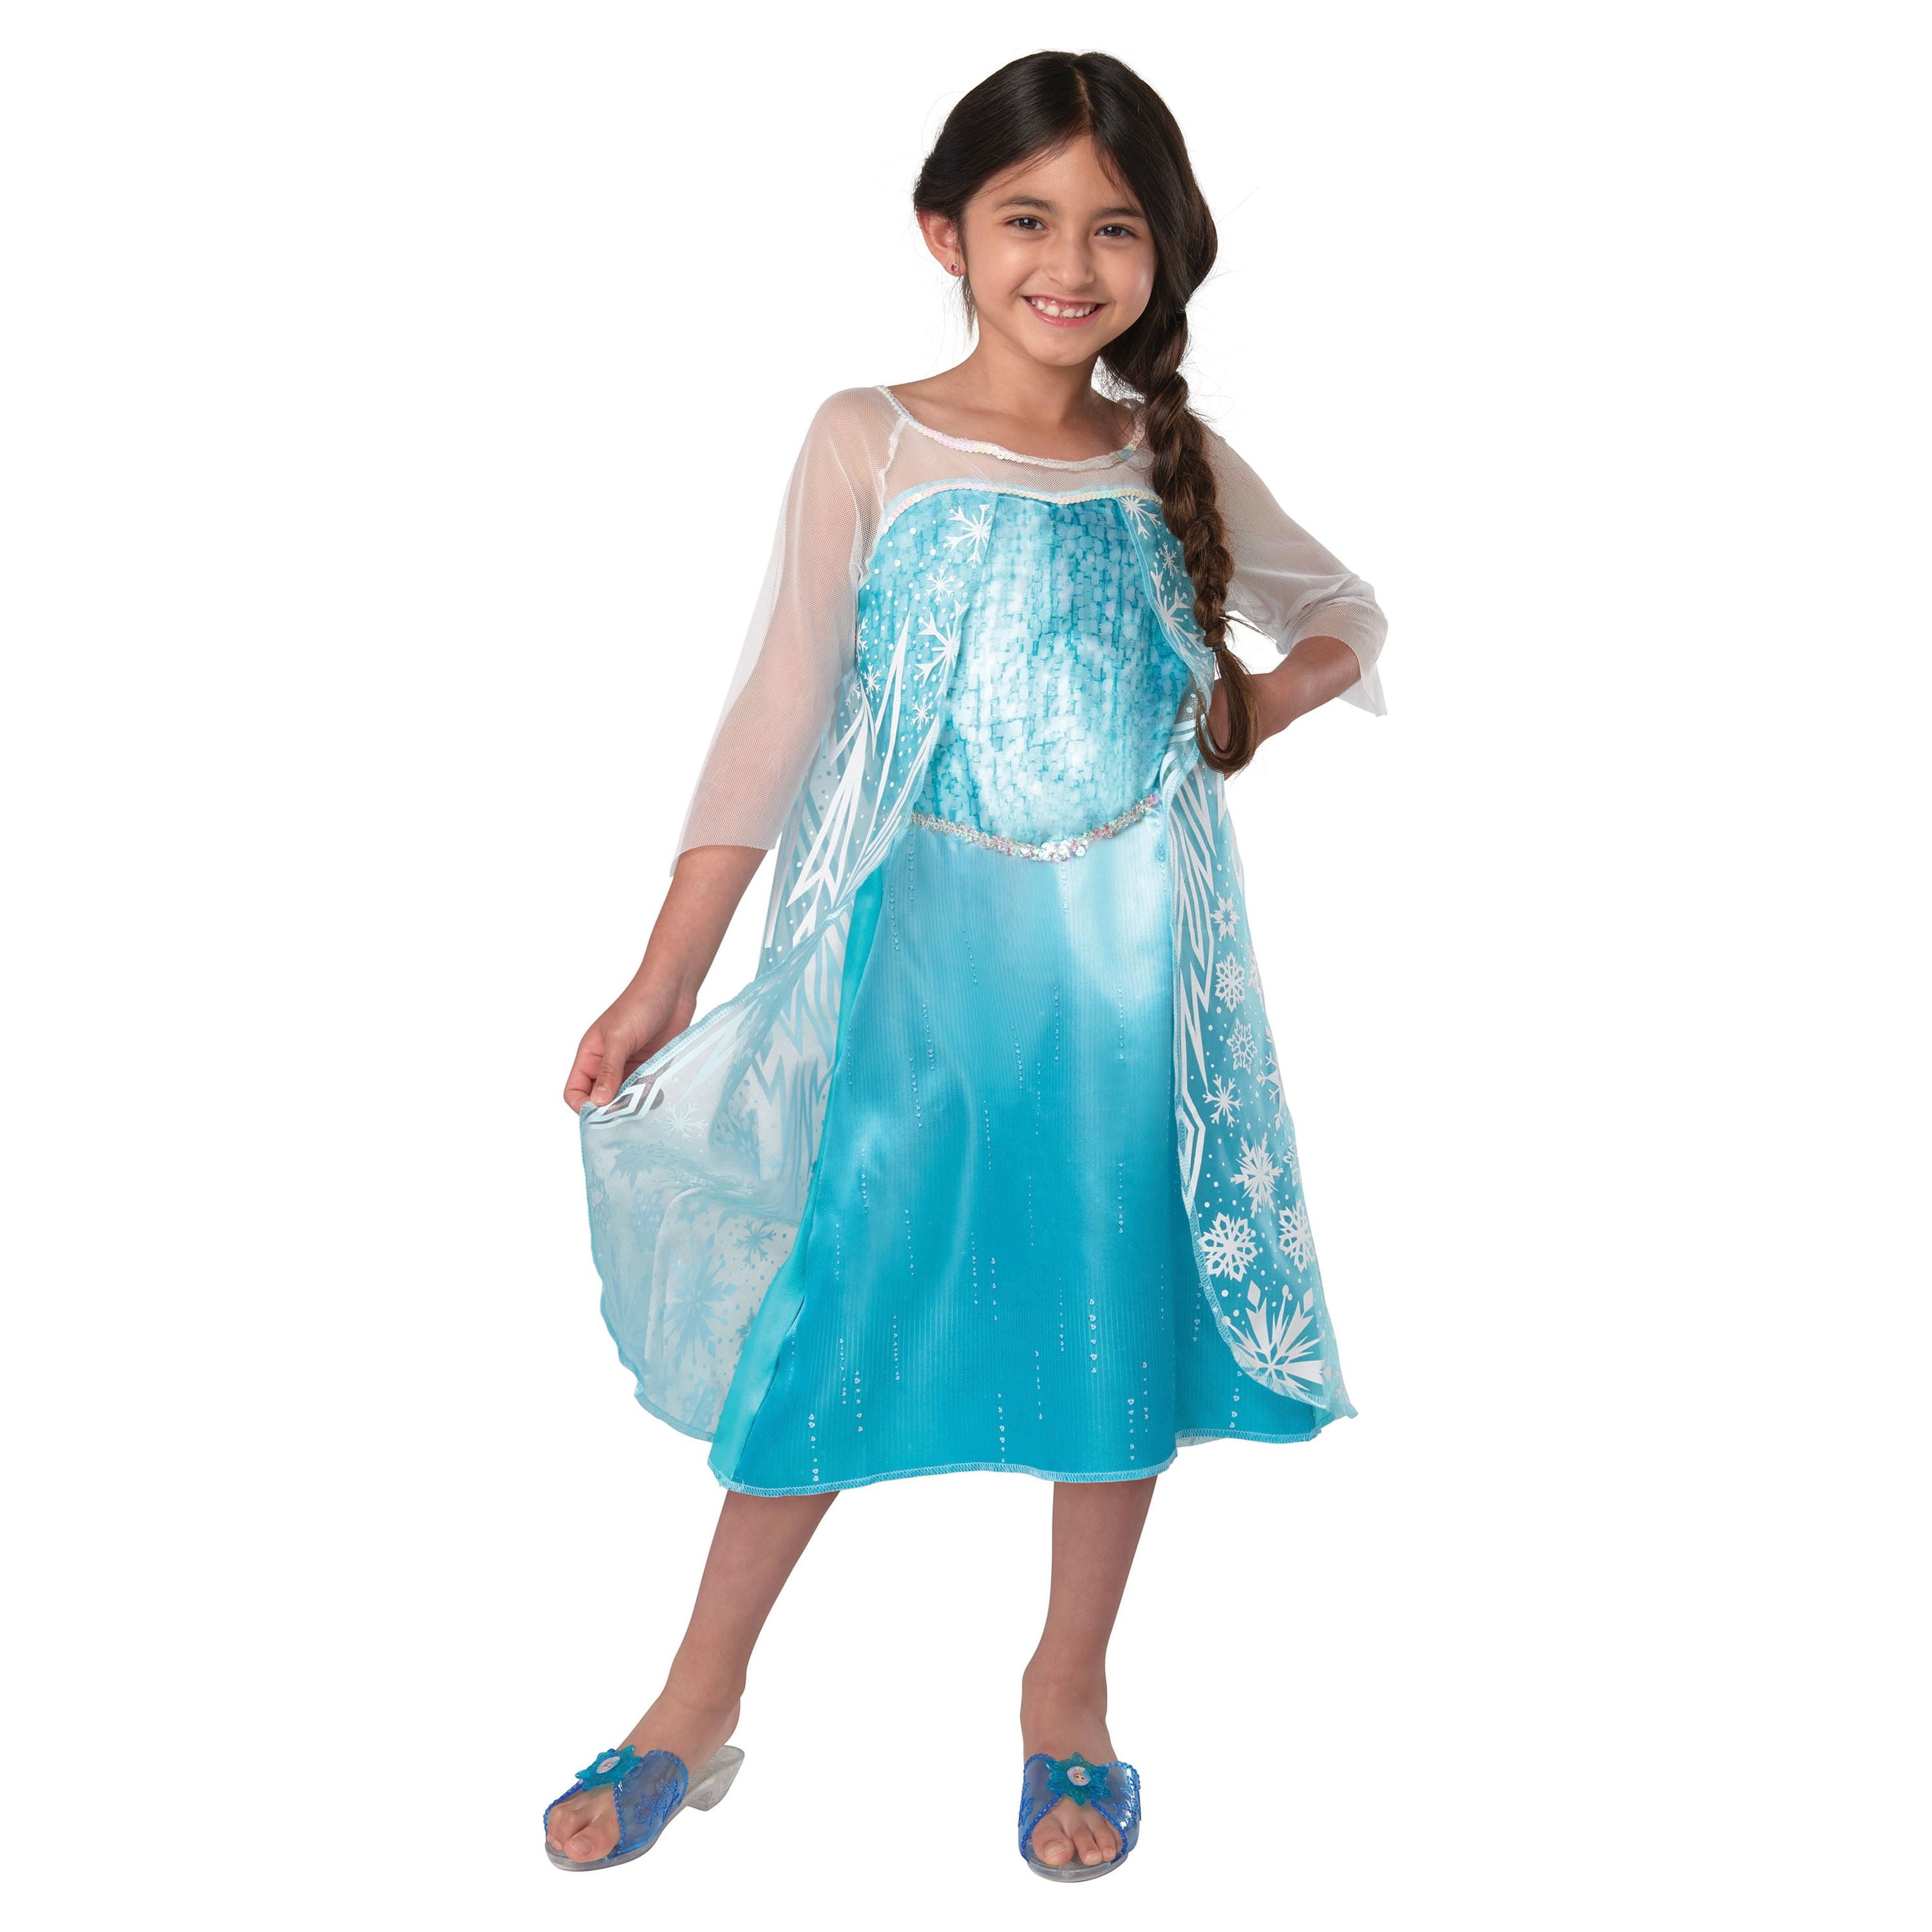 Girls Frozen Inspired Elsa Dazzle Costume Gown With Train | Halloween  costumes for girls, Halloween costume toddler girl, Princess halloween  costume